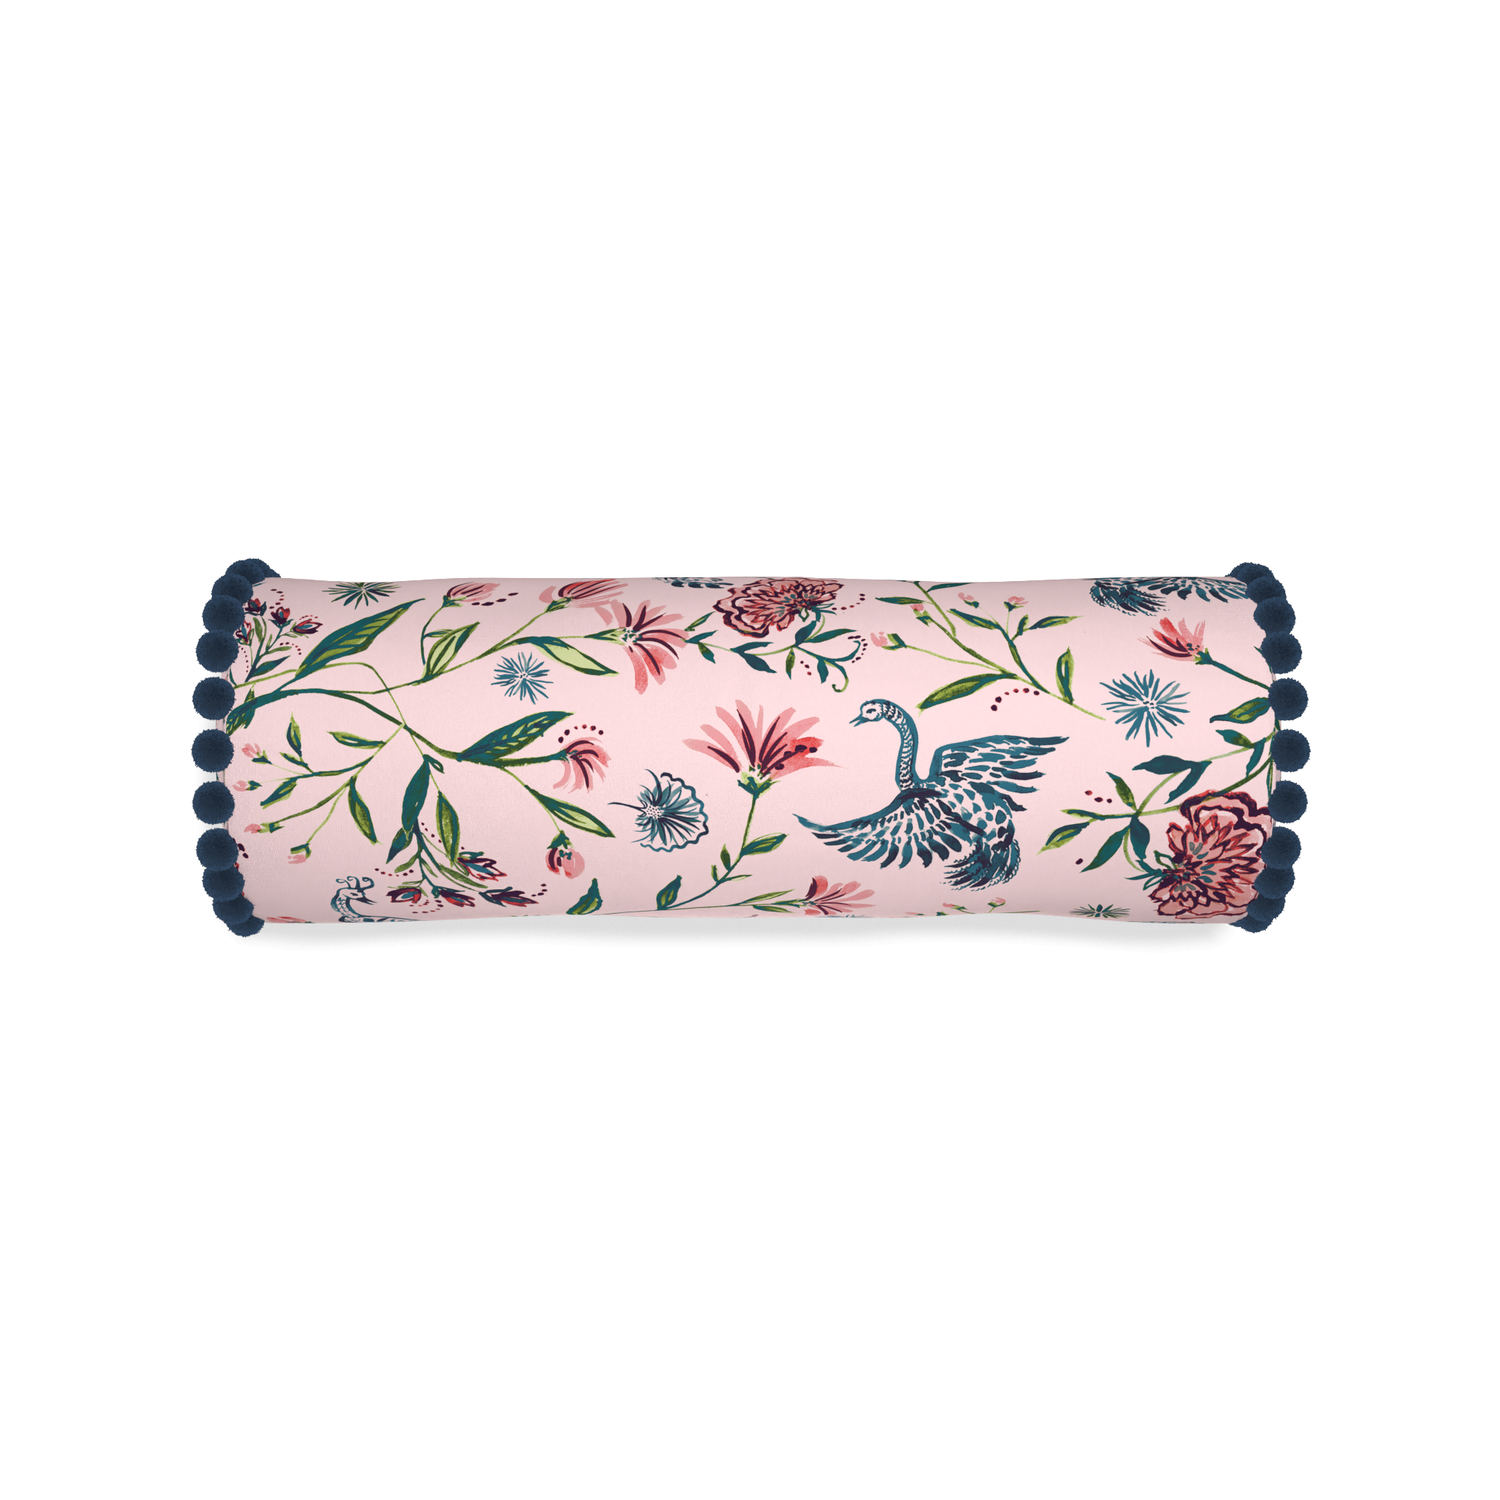 Bolster daphne rose custom rose chinoiseriepillow with c on white background